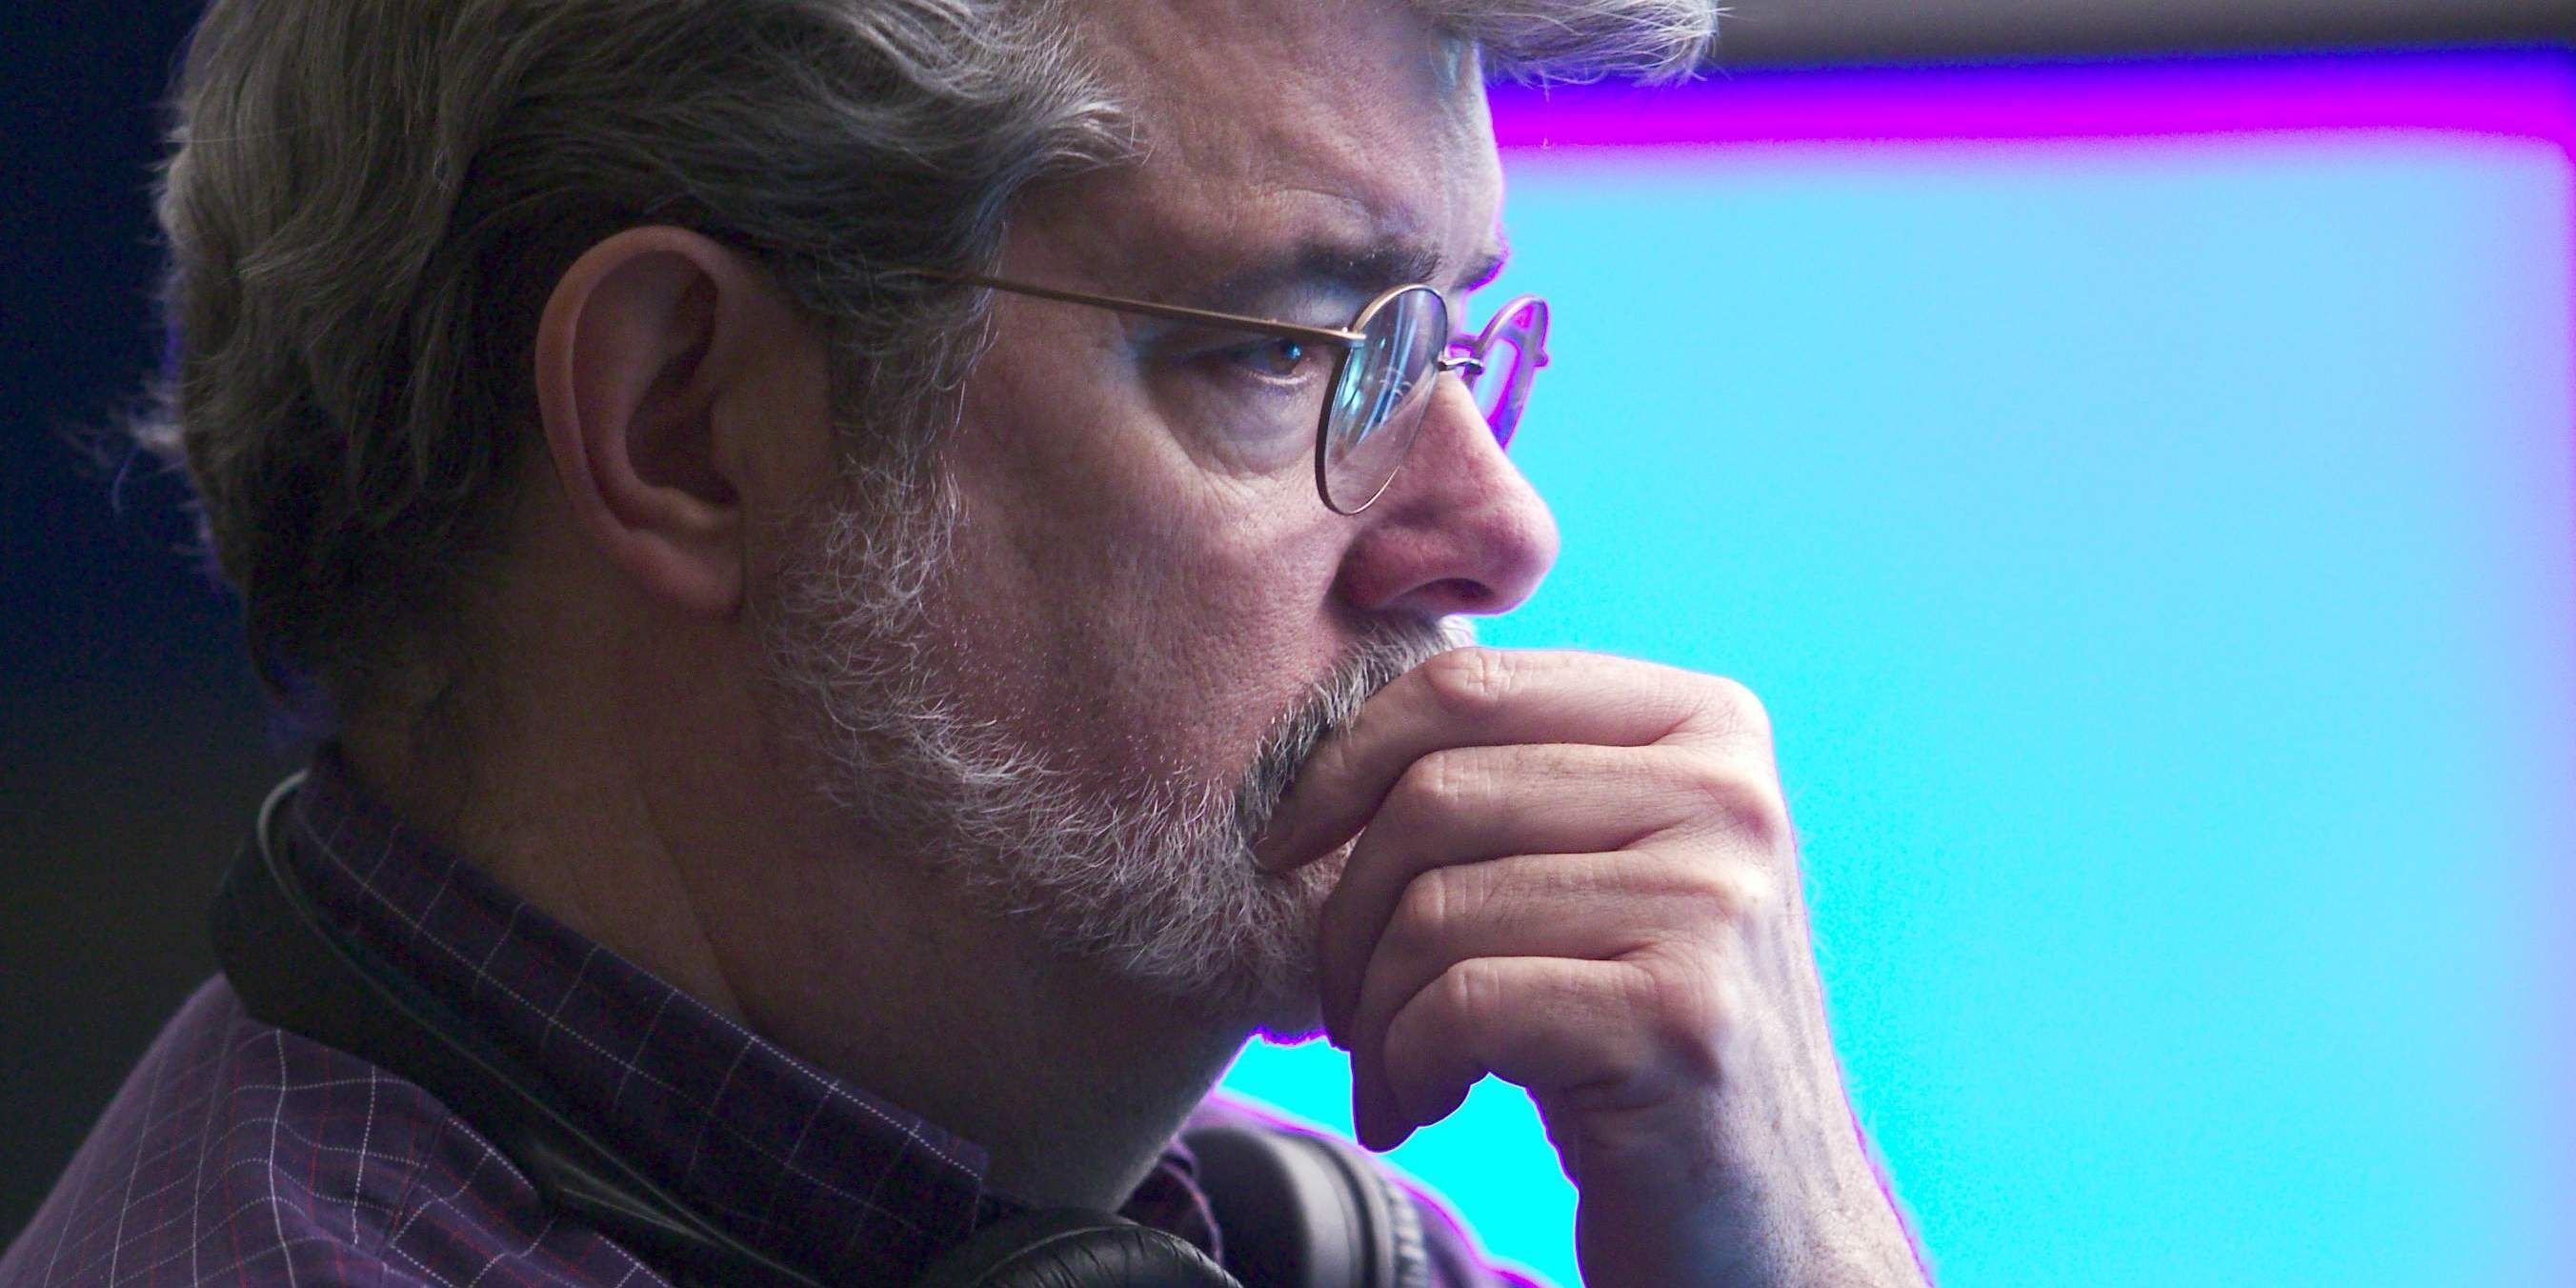 George Lucas on the set of Star Wars Episode III Revenge of the Sith